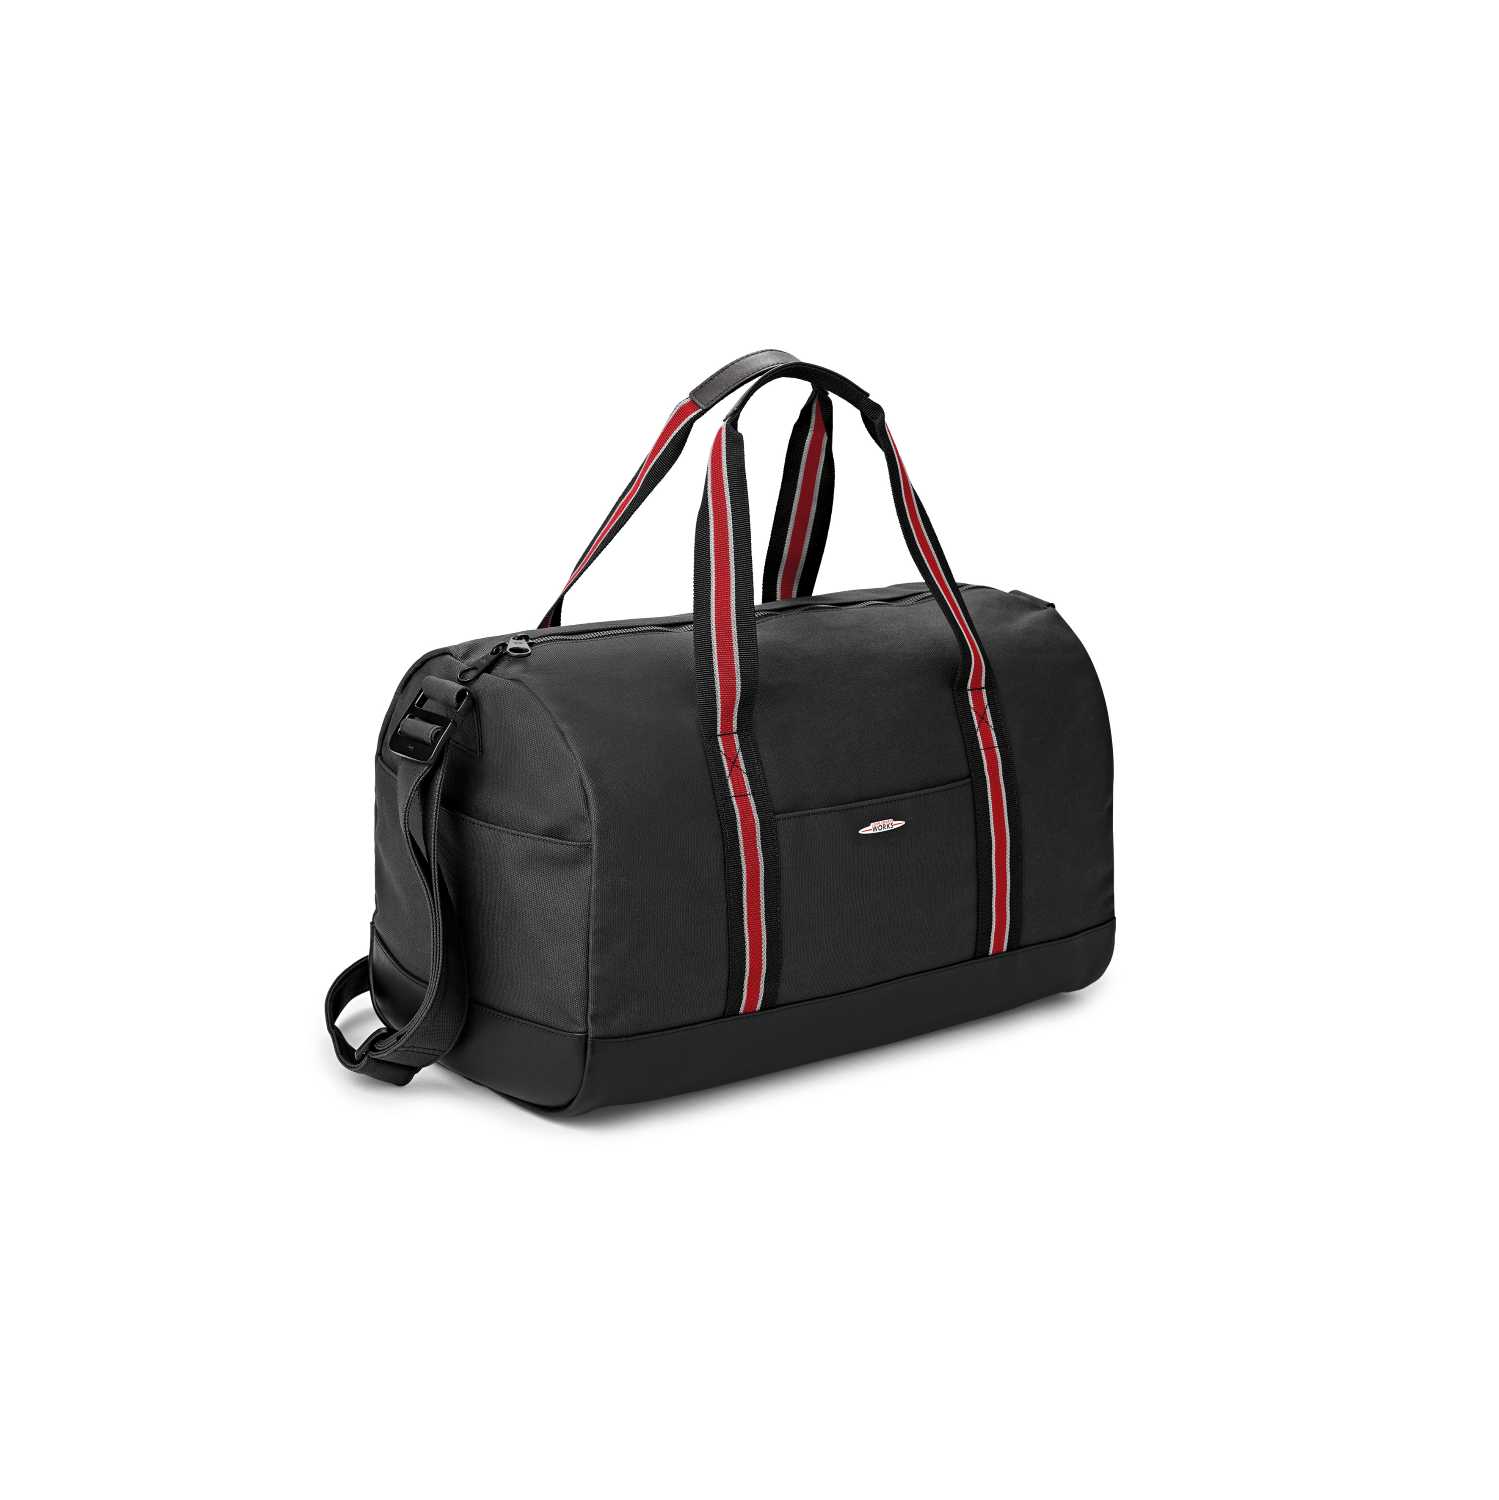 John Cooper Works Lifestyle Collection. JCW Duffle Bag (08/2017)